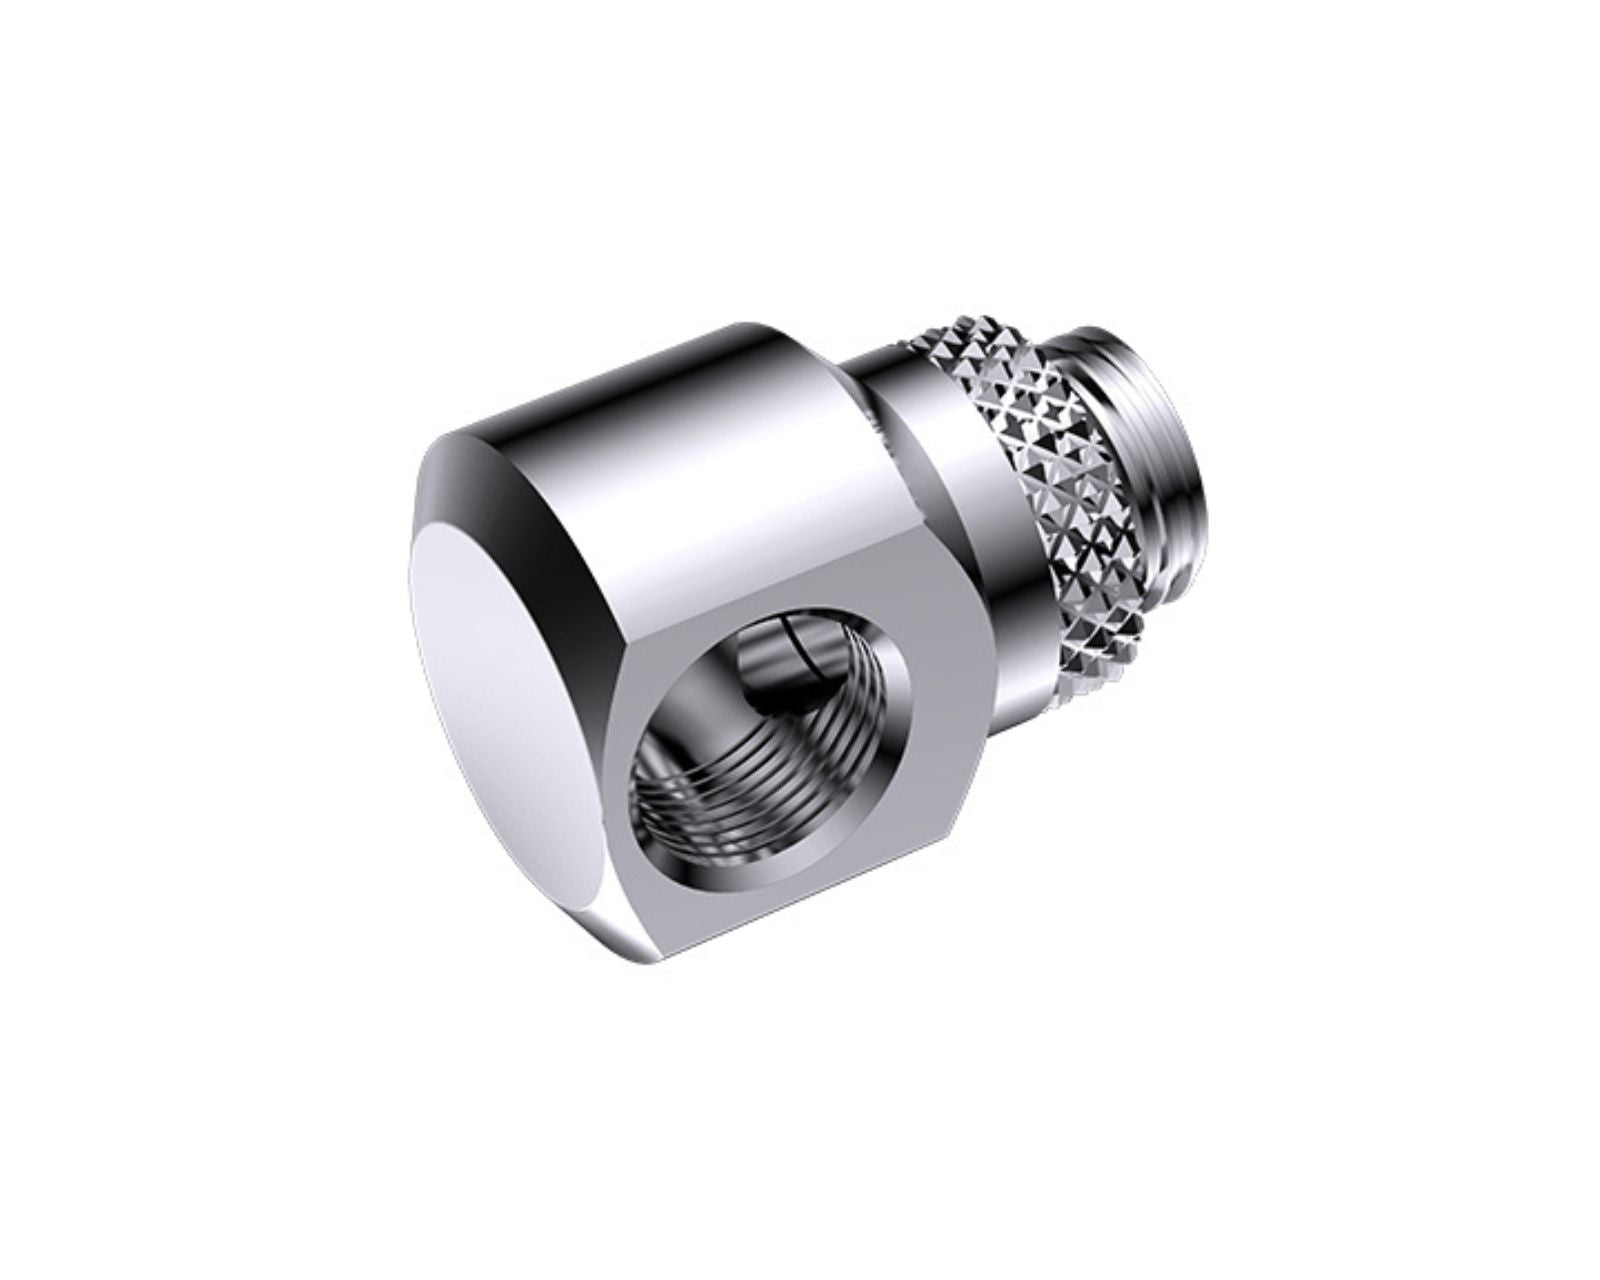 Bykski G 1/4in. Male to Female 360 Degree Rotary Elbow Fitting - 90 Degree Angle (CC-RD90S-X) - Silver